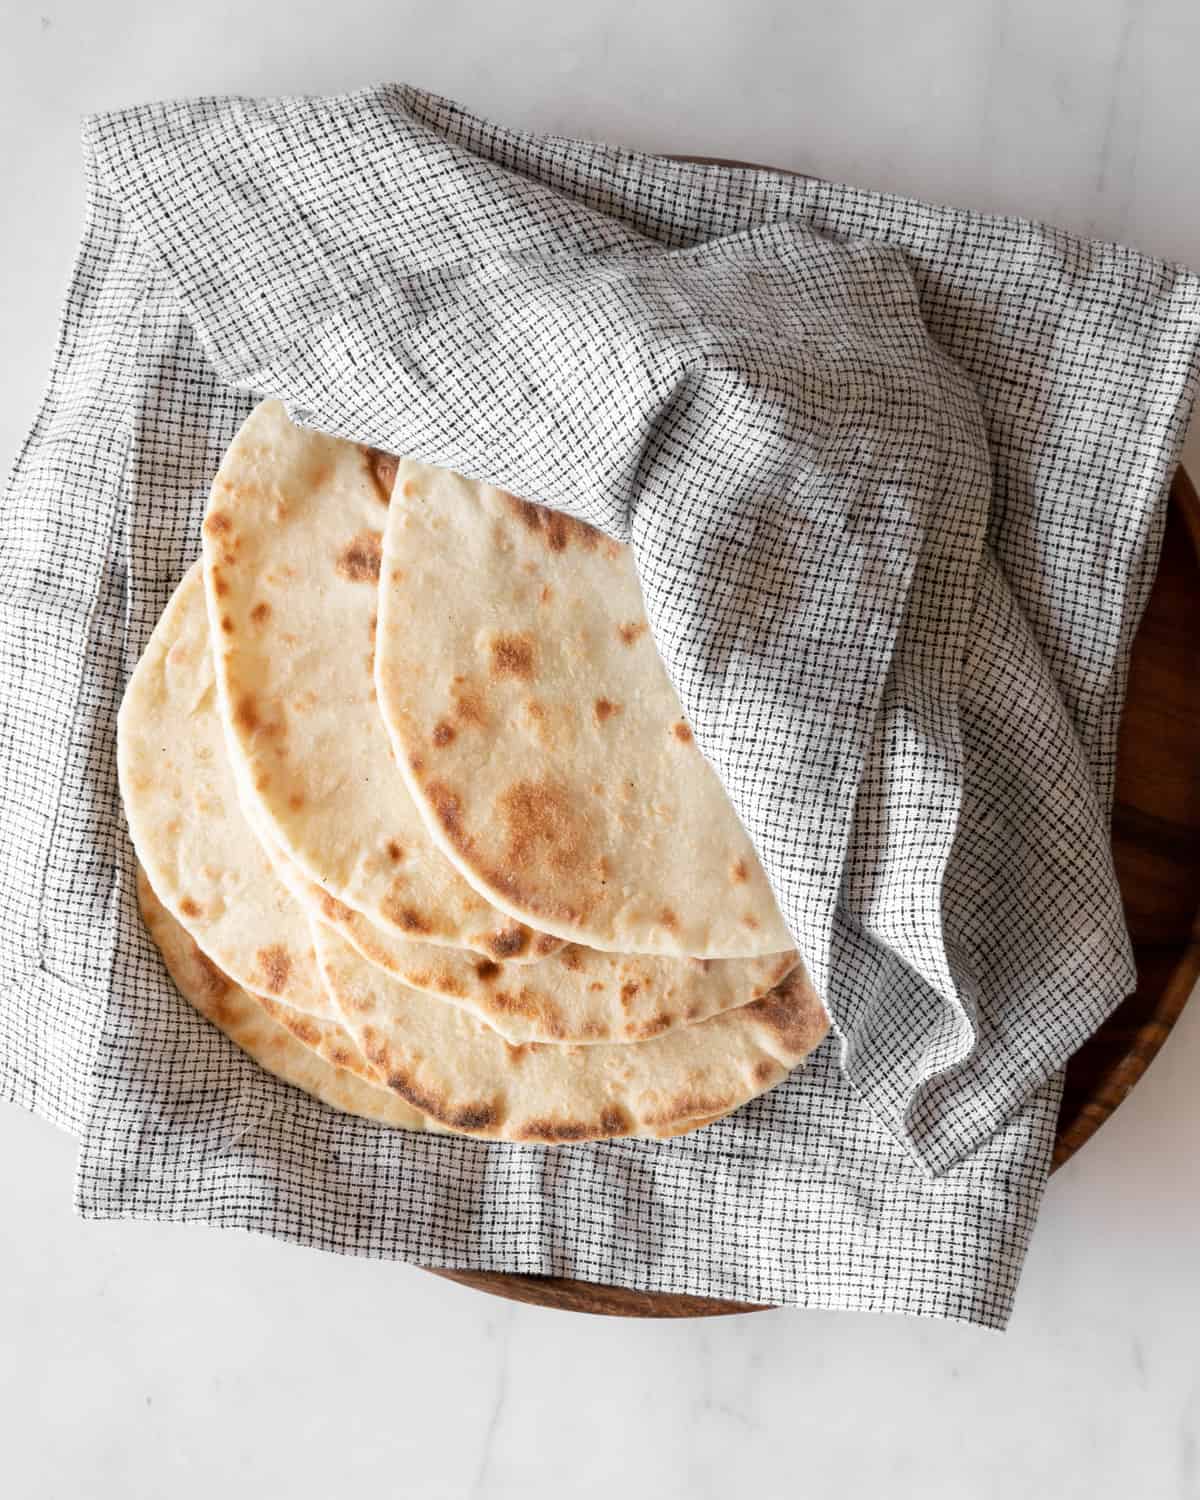 two-ingredient pita bread in a linen on a wooden plate.